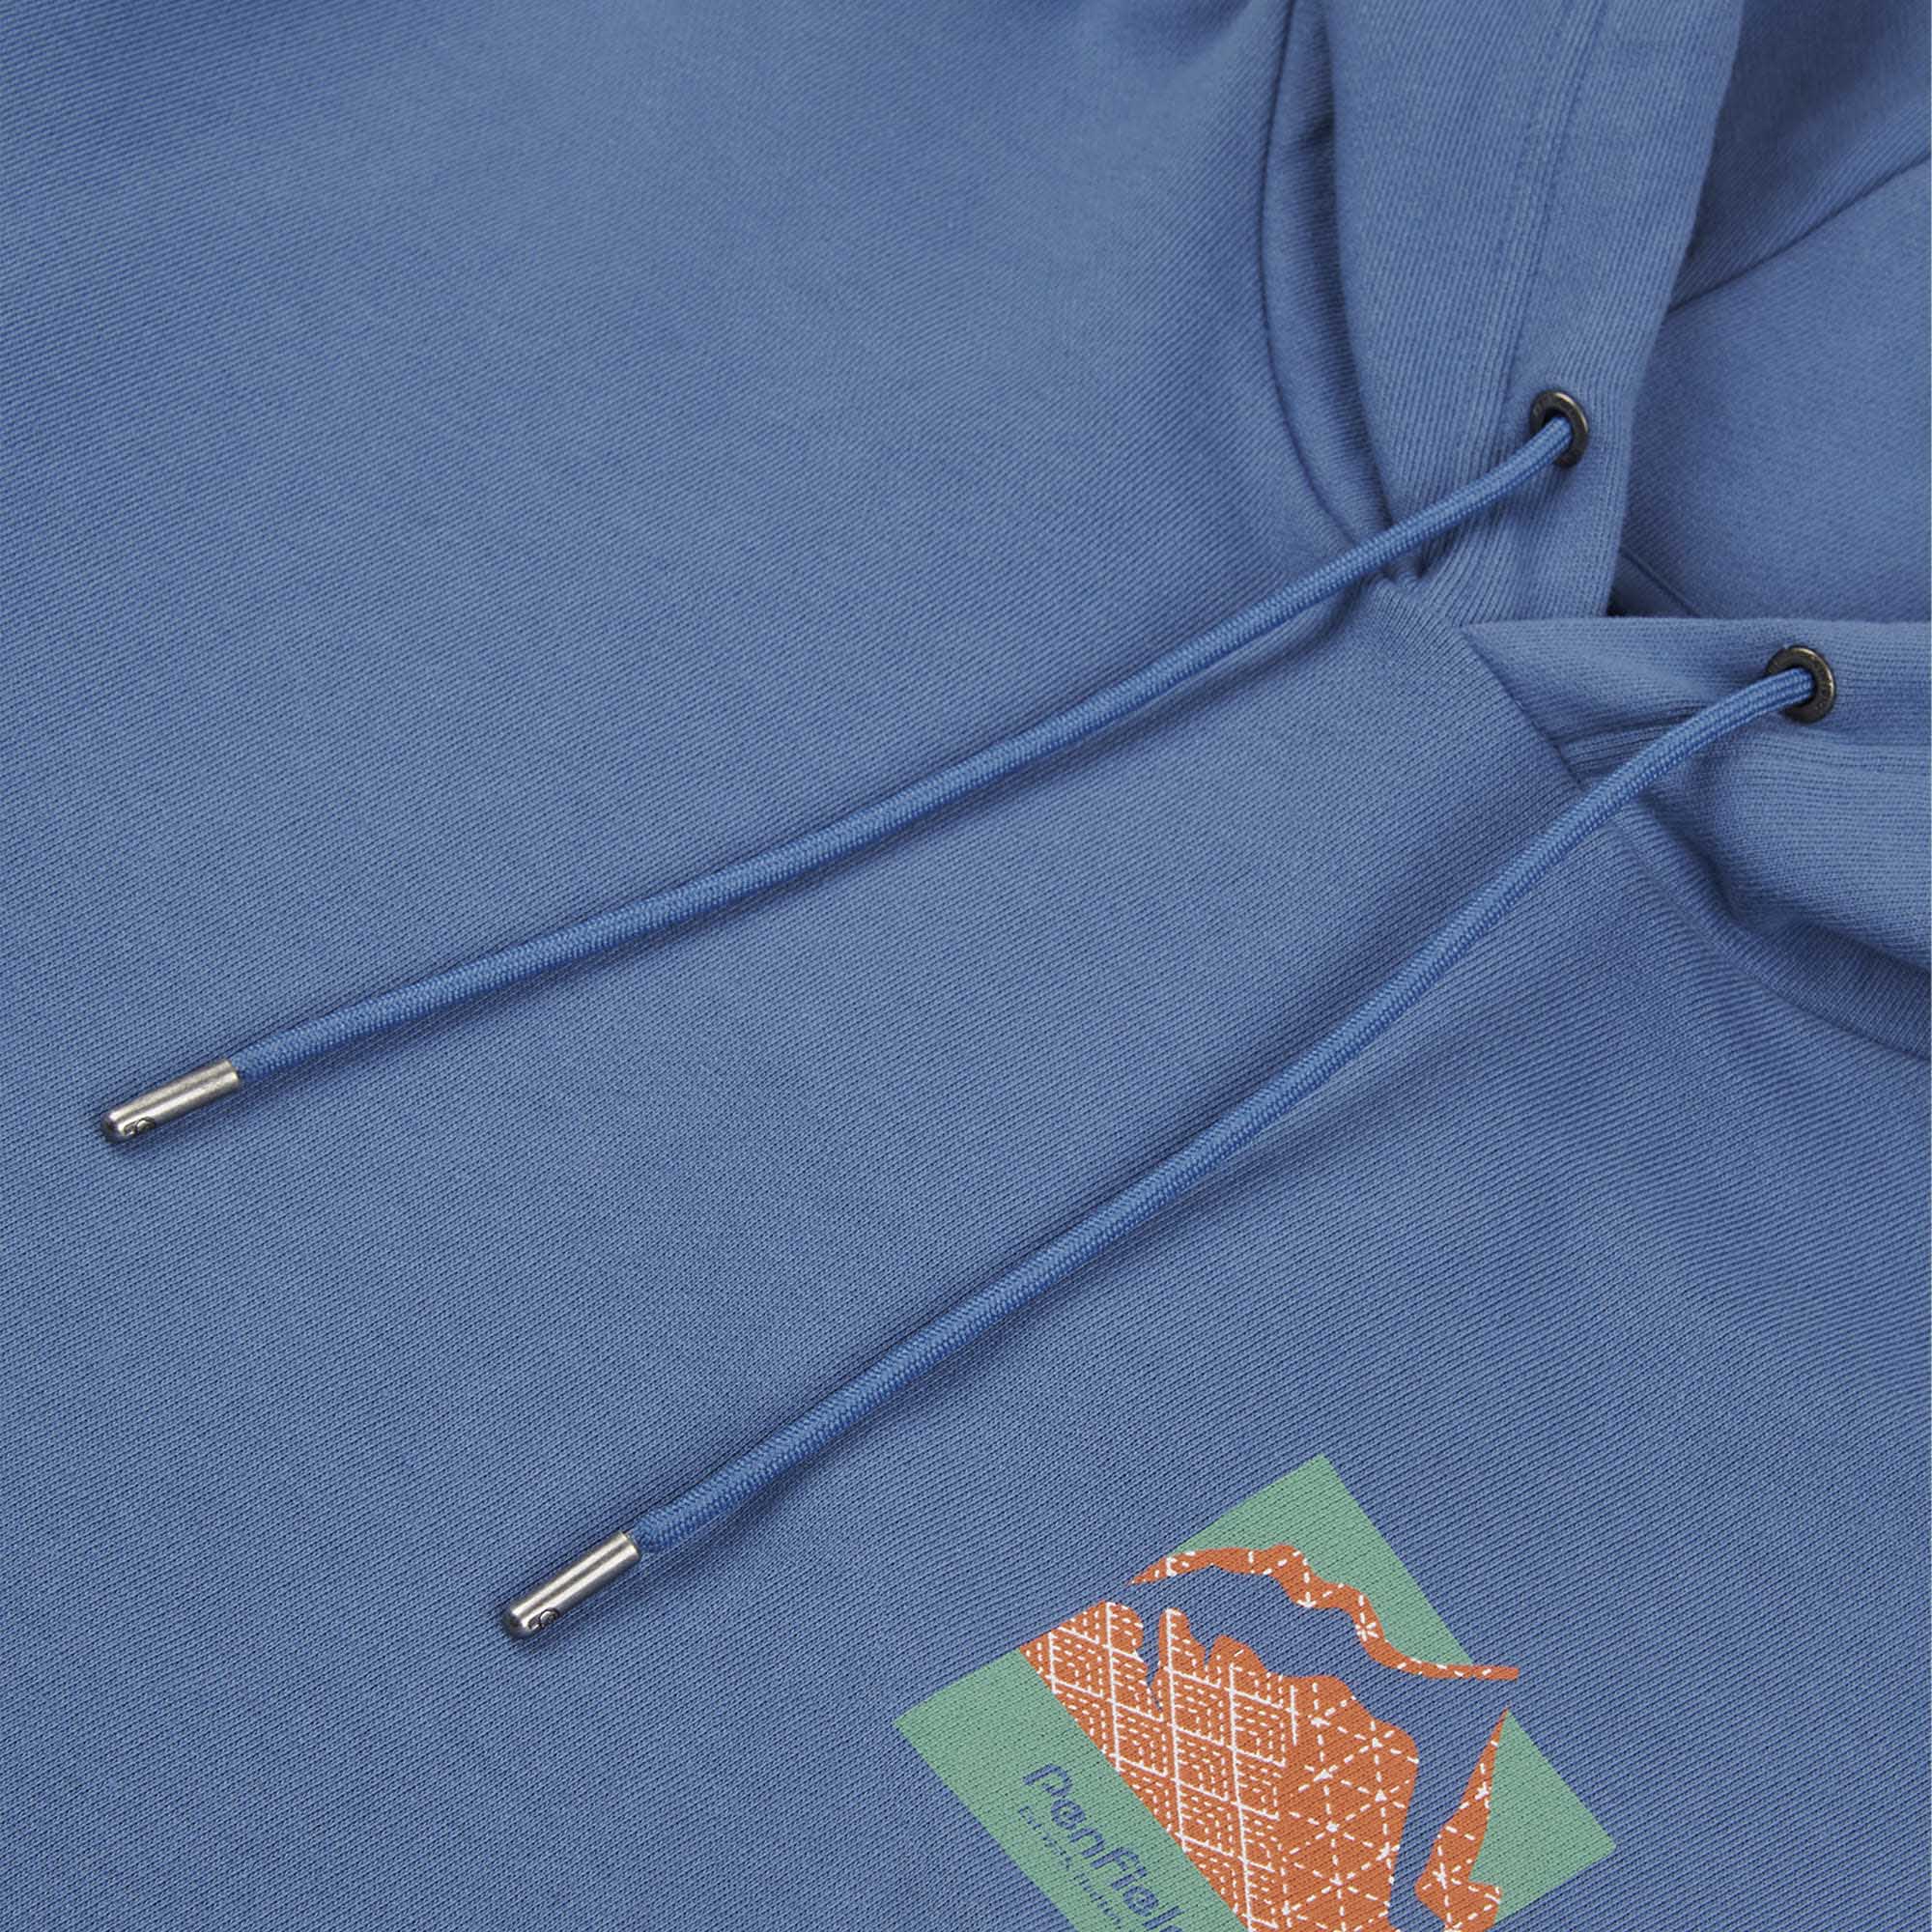 Relaxed Fit Mountain Back Print Hoodie in Blue Horizon